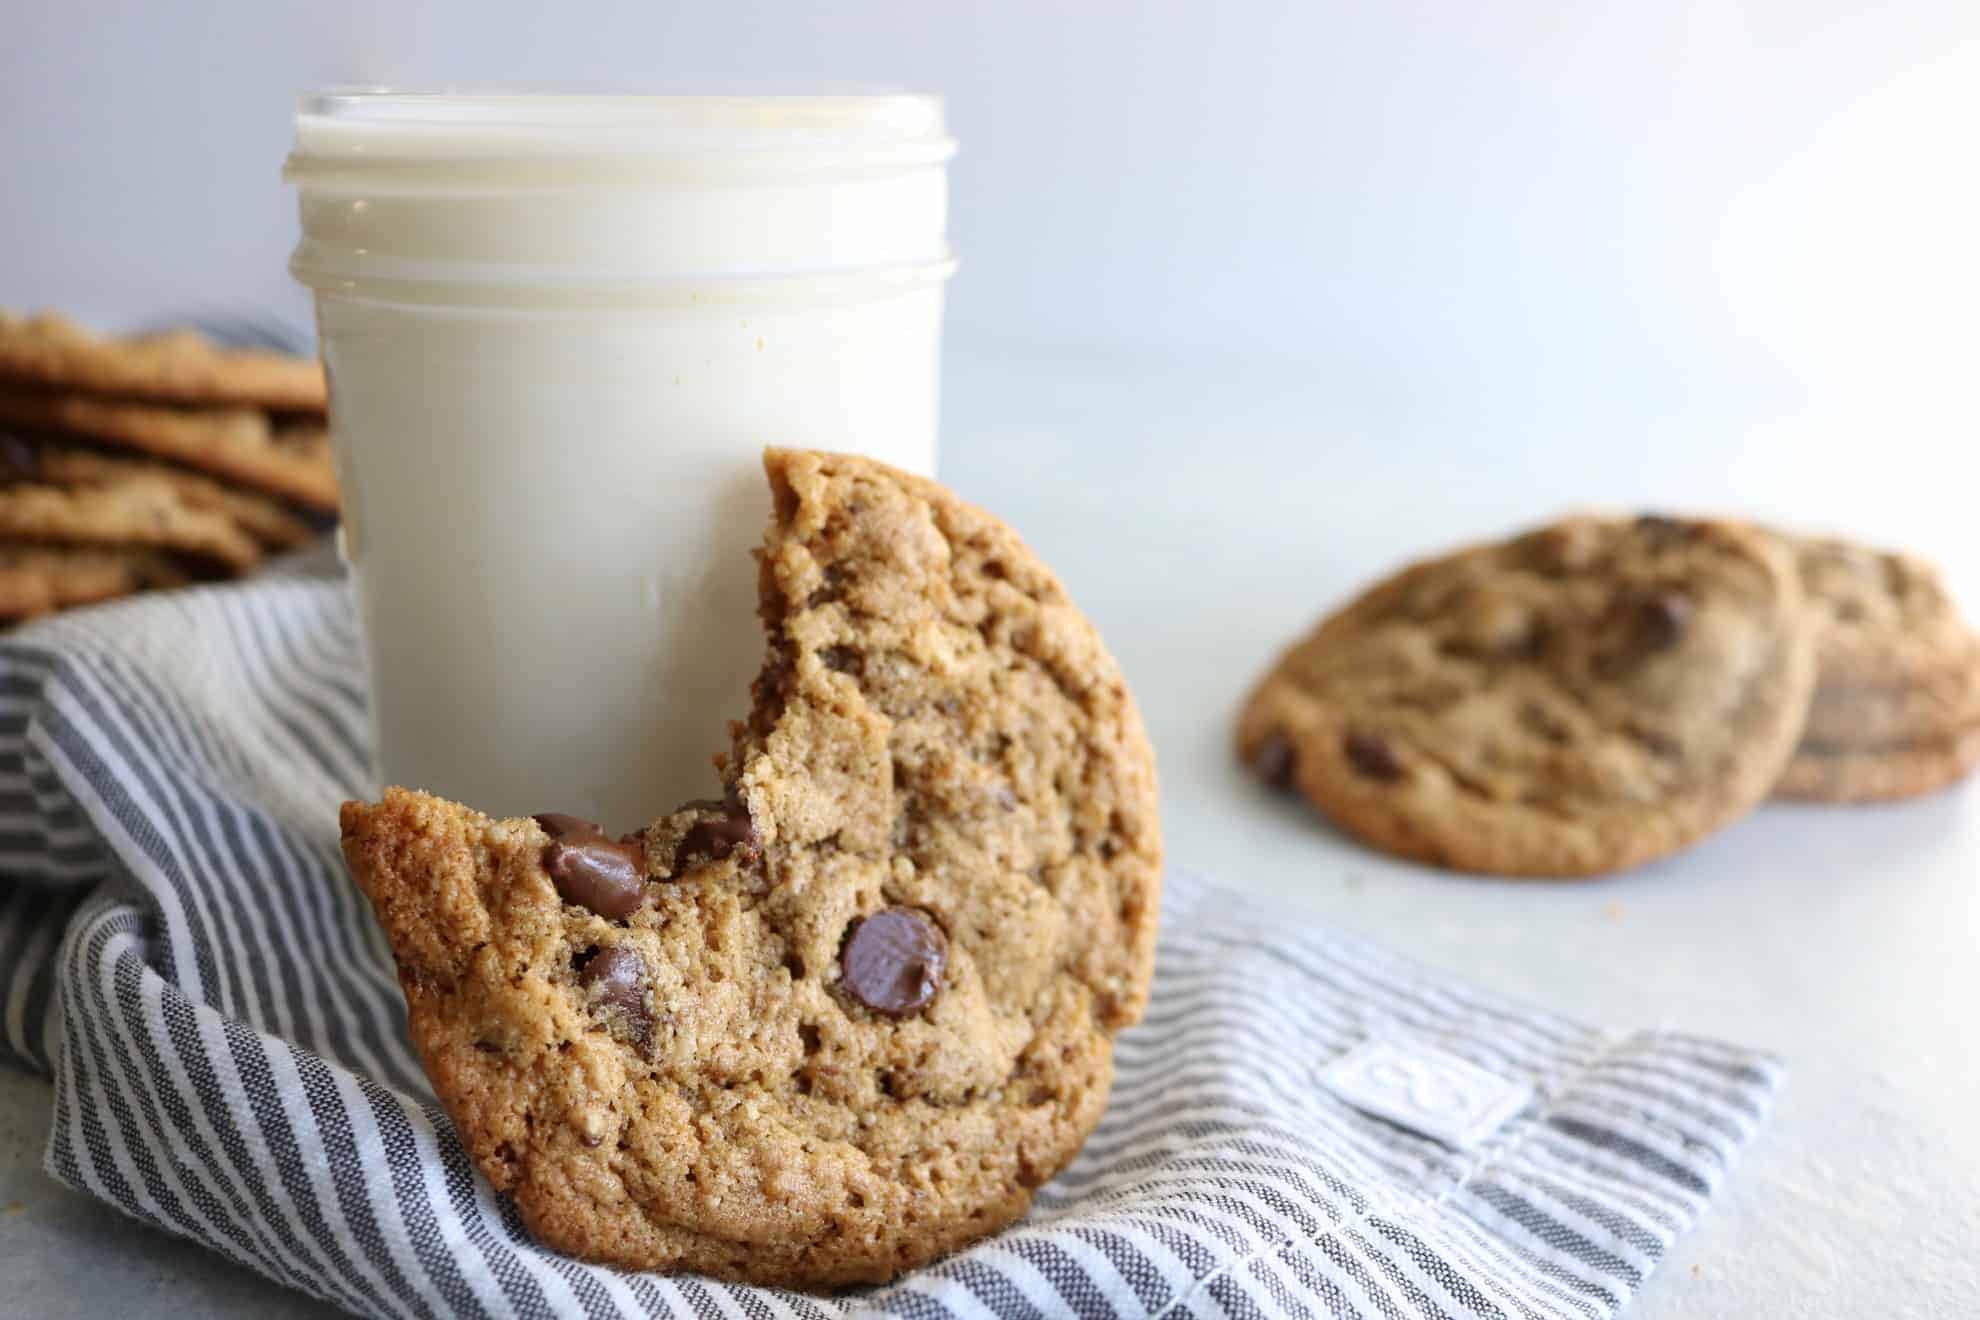 This is a side image of a glass of milk with a cookie leaning against it. The cookie has a bite taken out. More cookies are off to the side and blurred in the background. The glass sits on a white and grey surface with a grey pinstripe tea towel. 